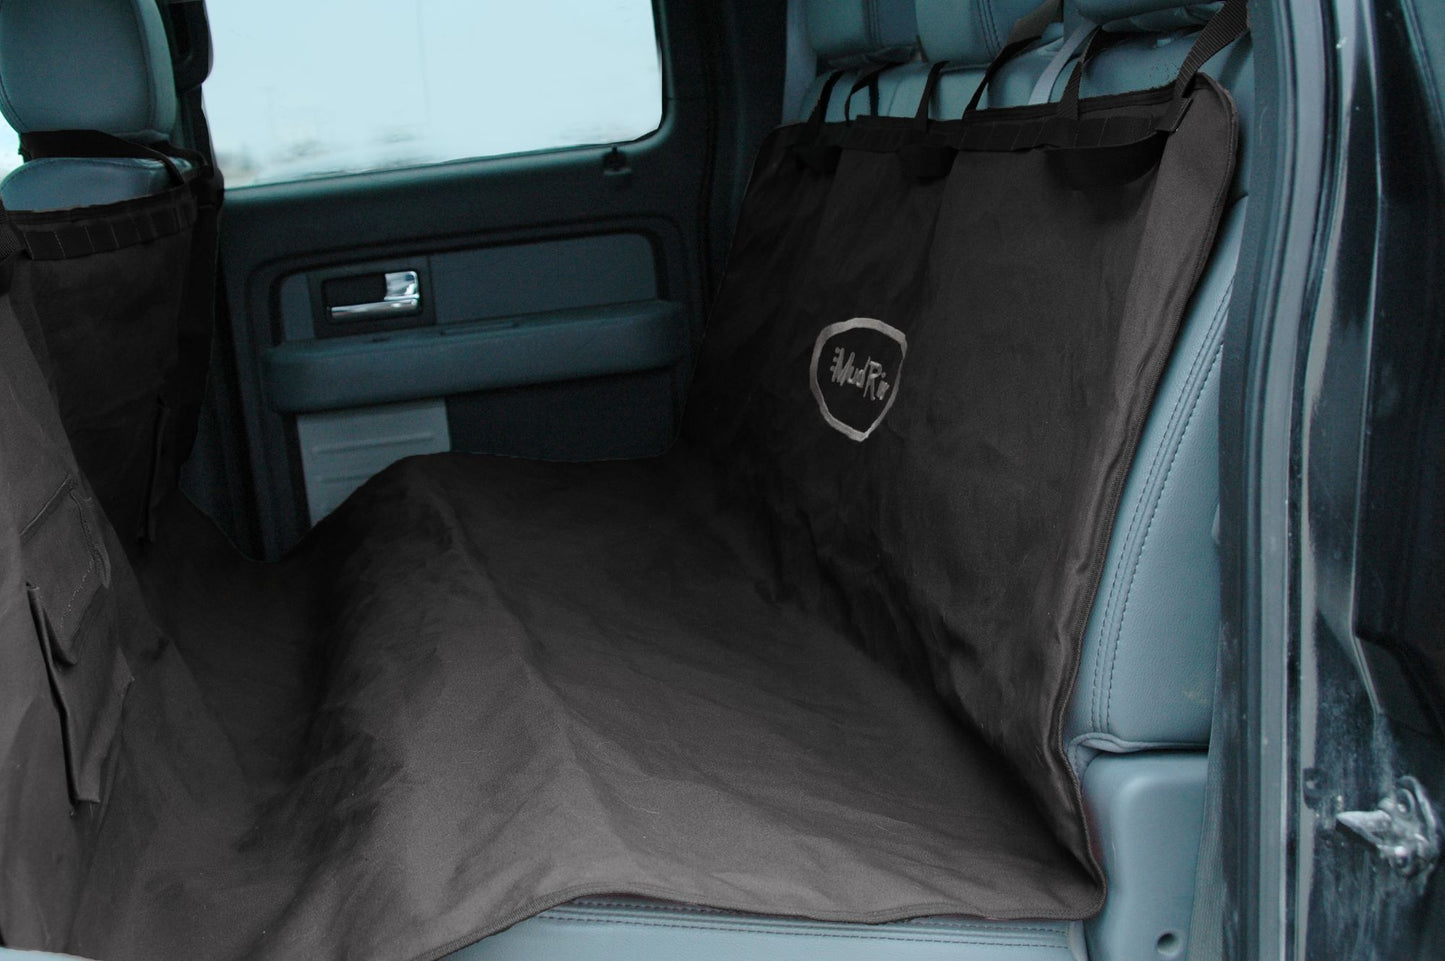 Mud River Hammock Style Seat Cover